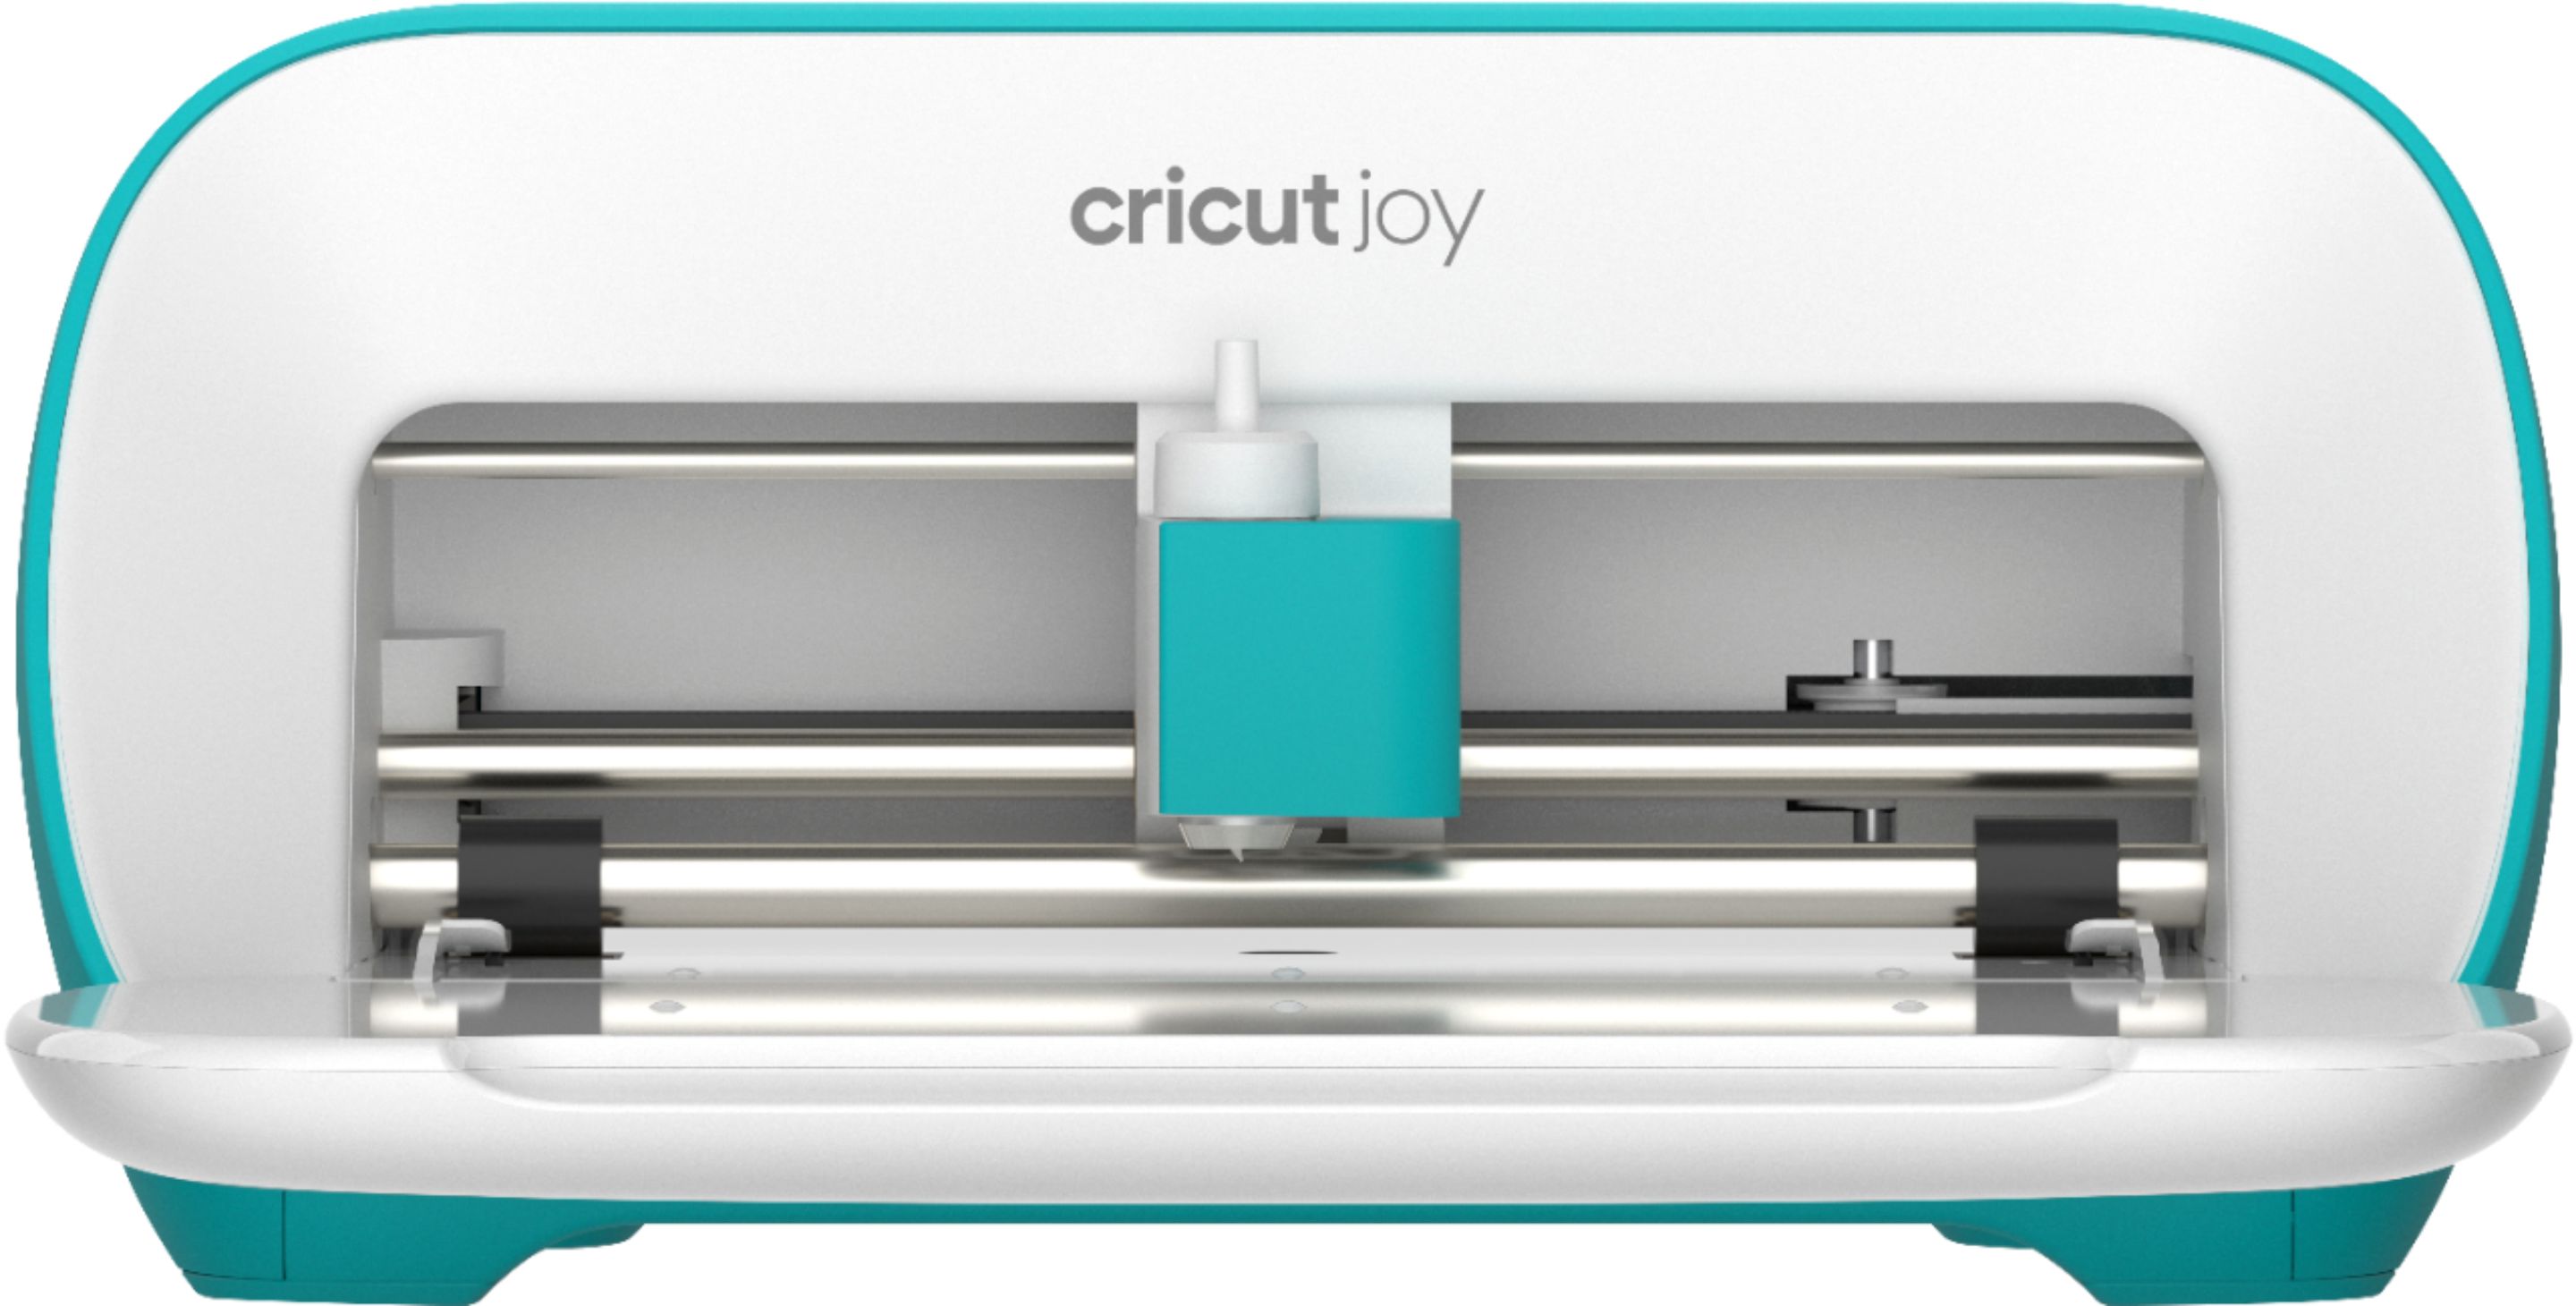  Cricut Joy Machine - A Compact, Portable DIY Smart for Creating  Customized Labels, Cards & Crafts, Works with Iron-on, Vinyl, Paper  Materials, Bluetooth-Enabled (iOS/Android/Windows)